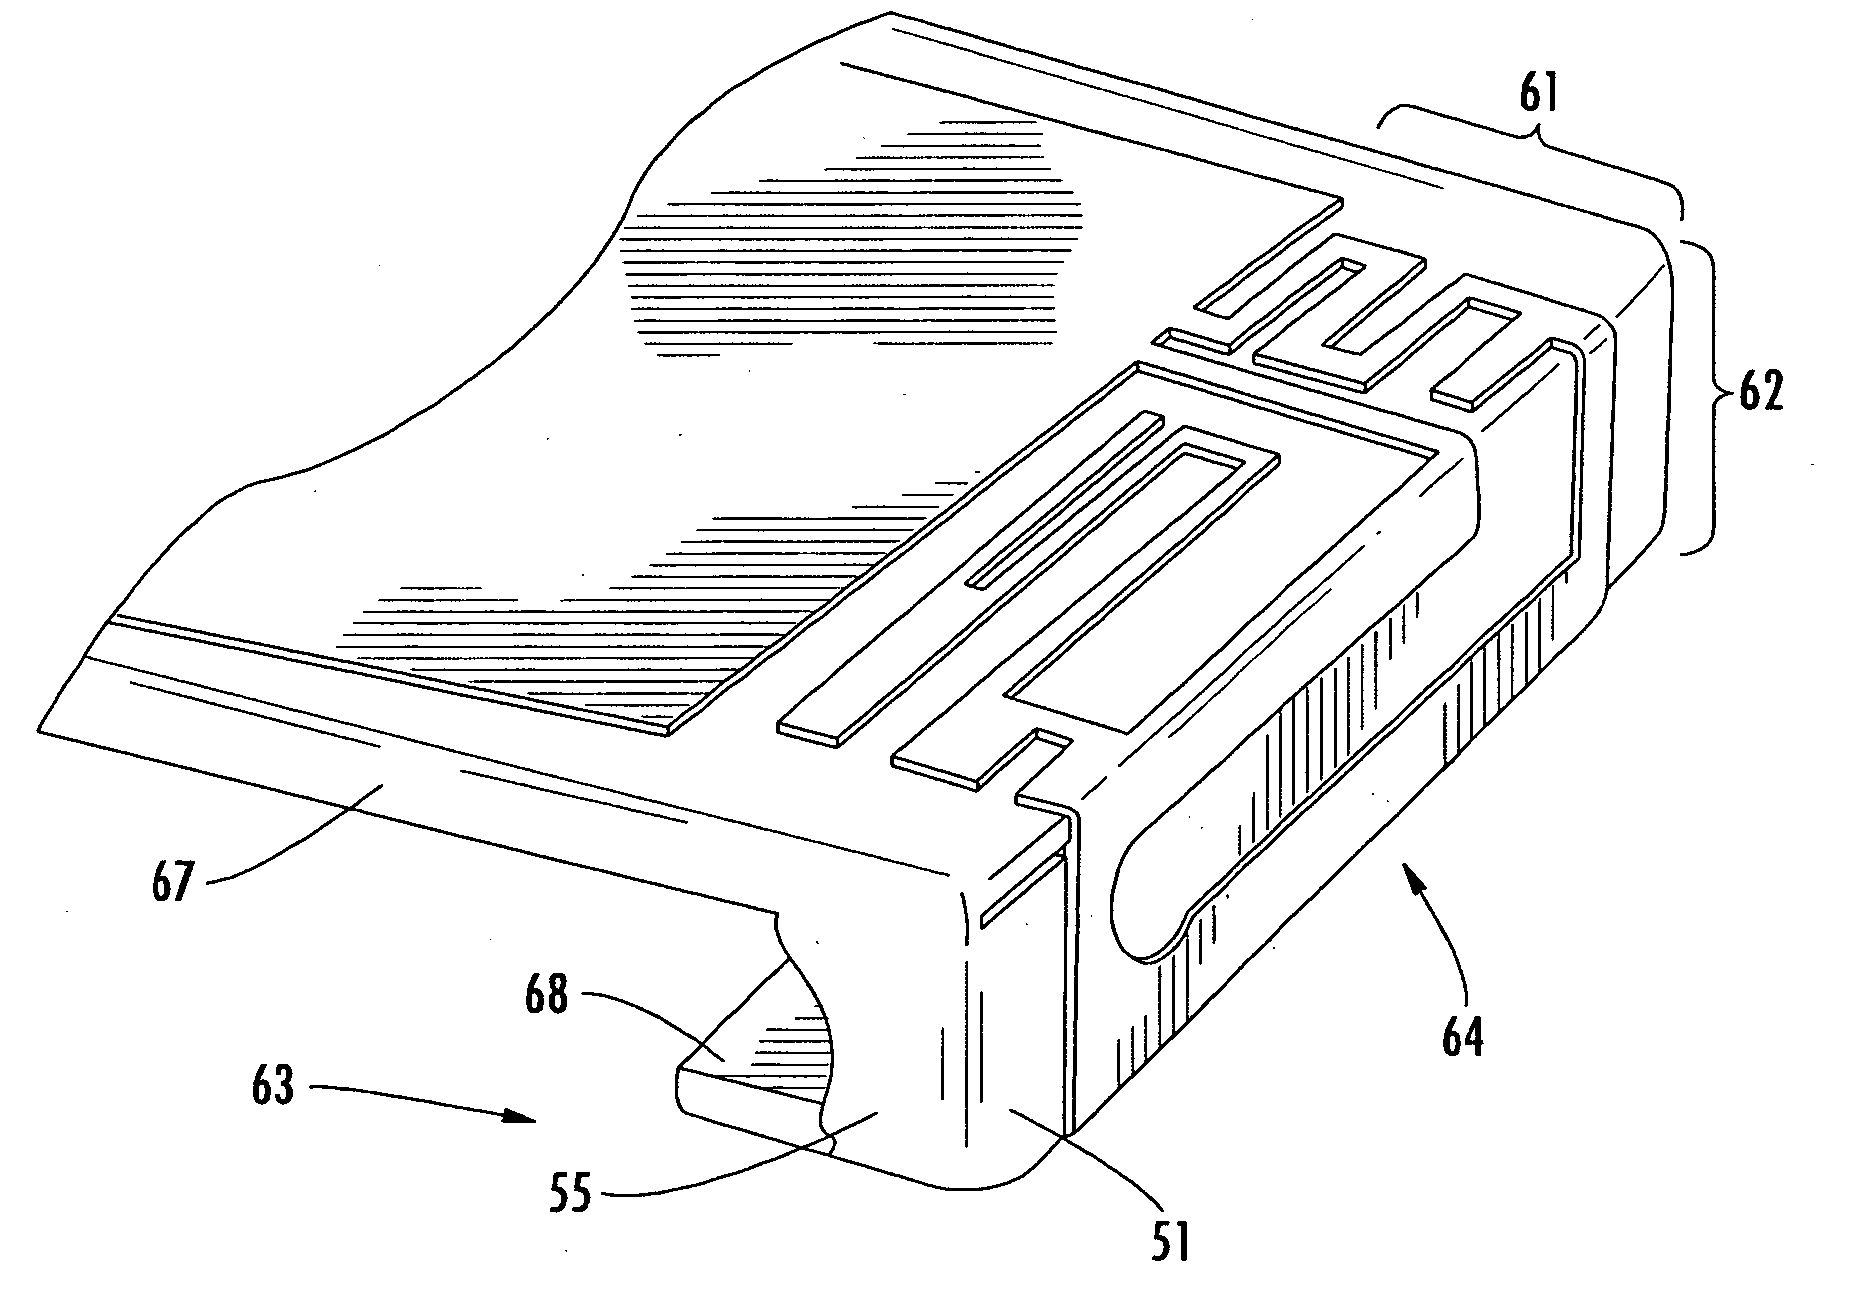 Mobile wireless communications device comprising a top-mounted auxiliary input/output device and a bottom-mounted antenna